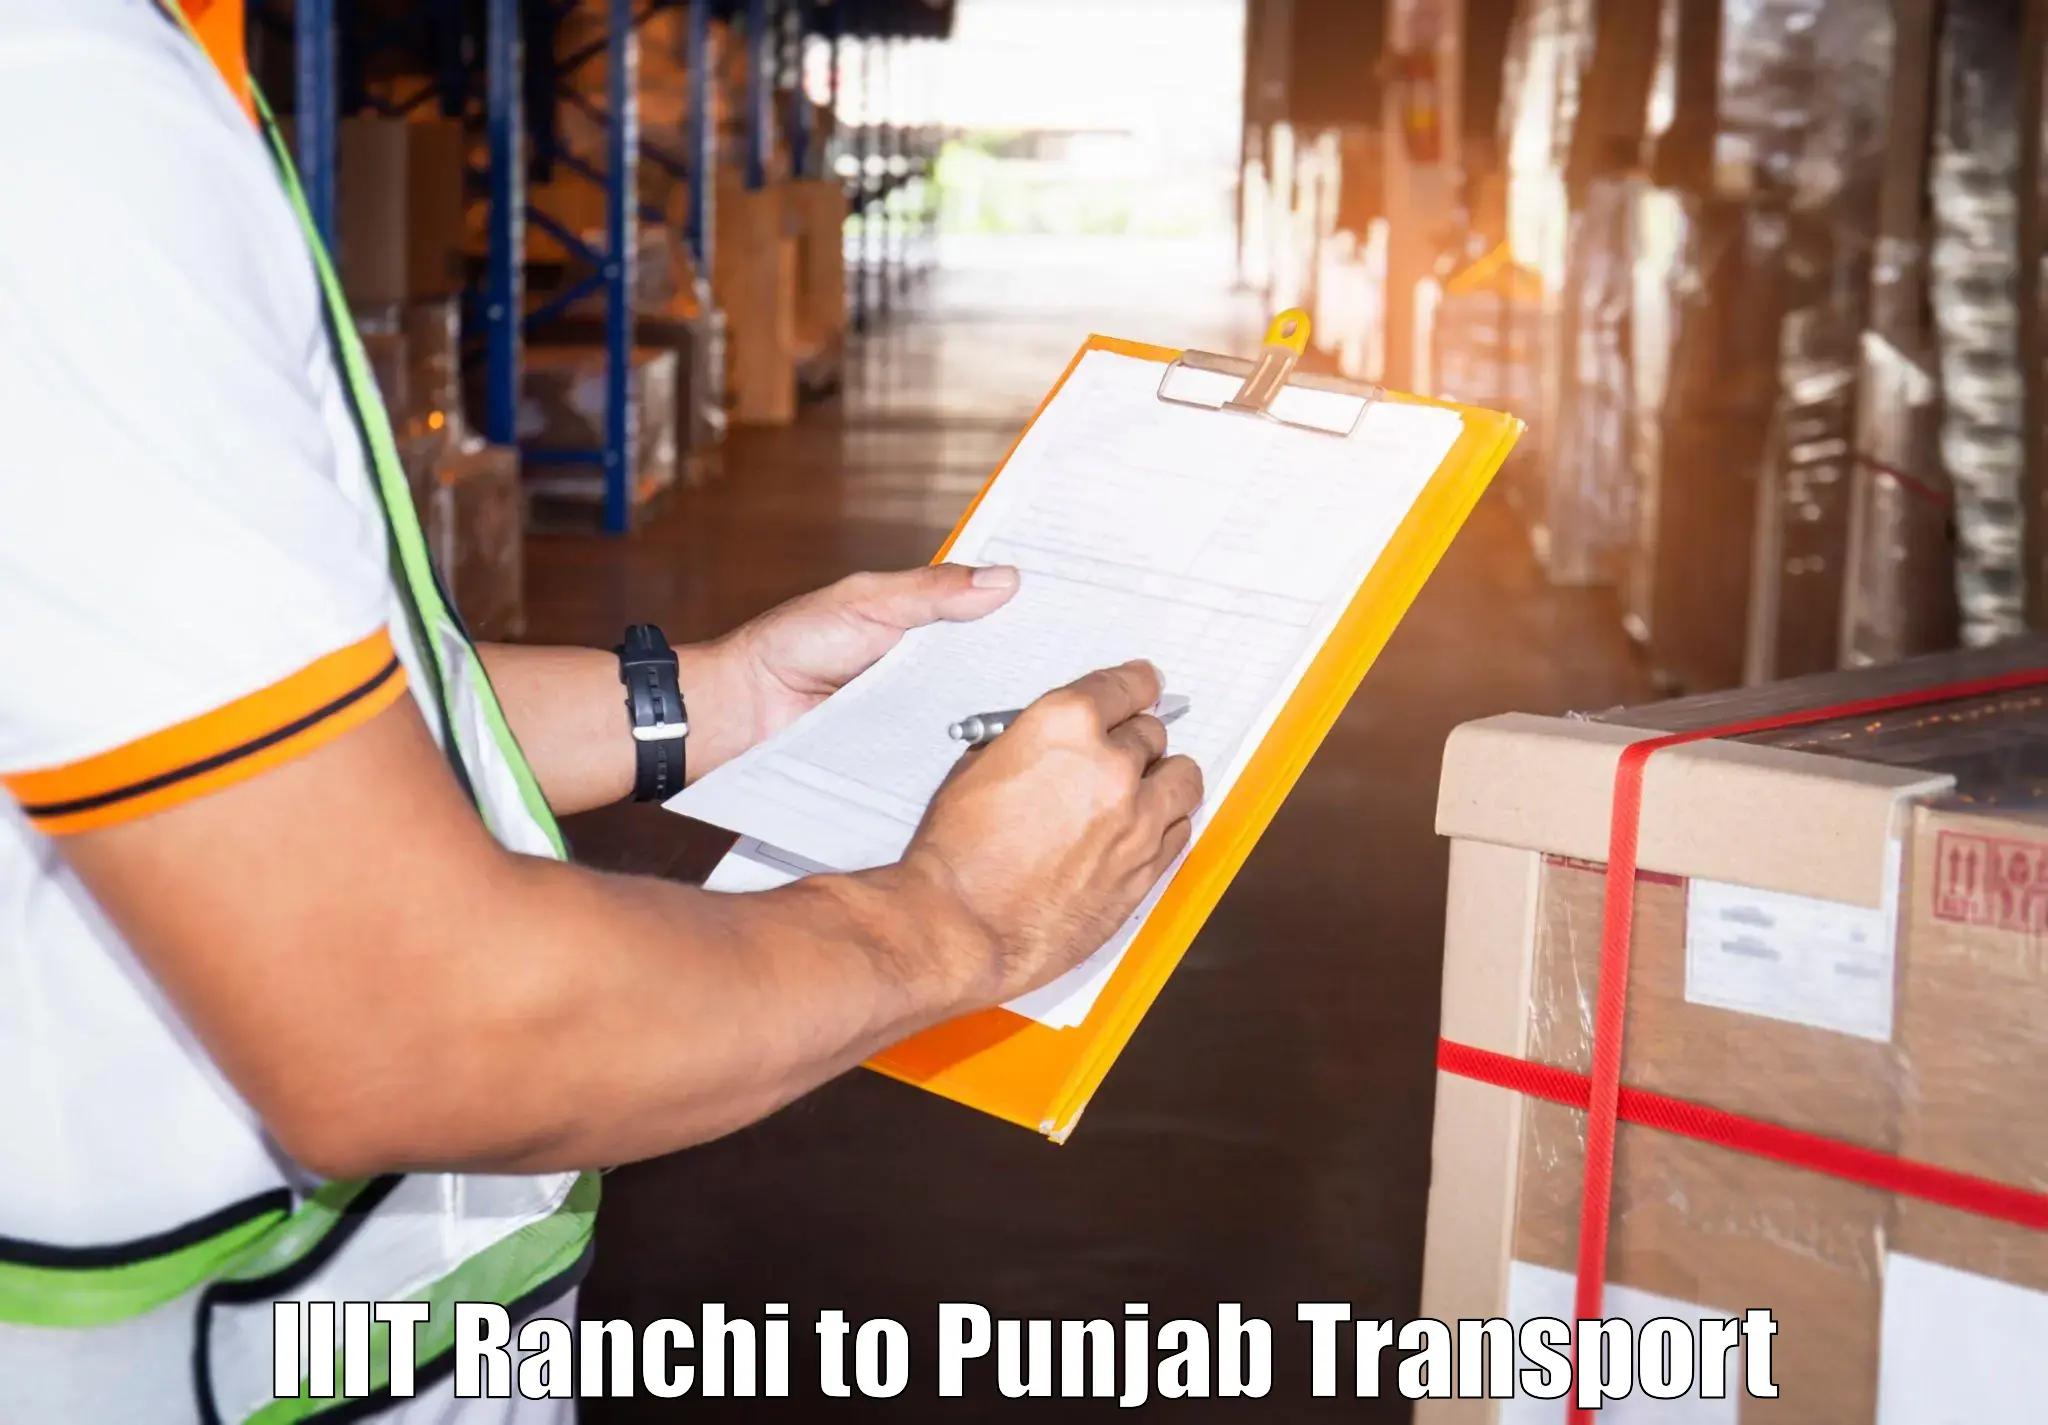 Transportation services IIIT Ranchi to Sultanpur Lodhi